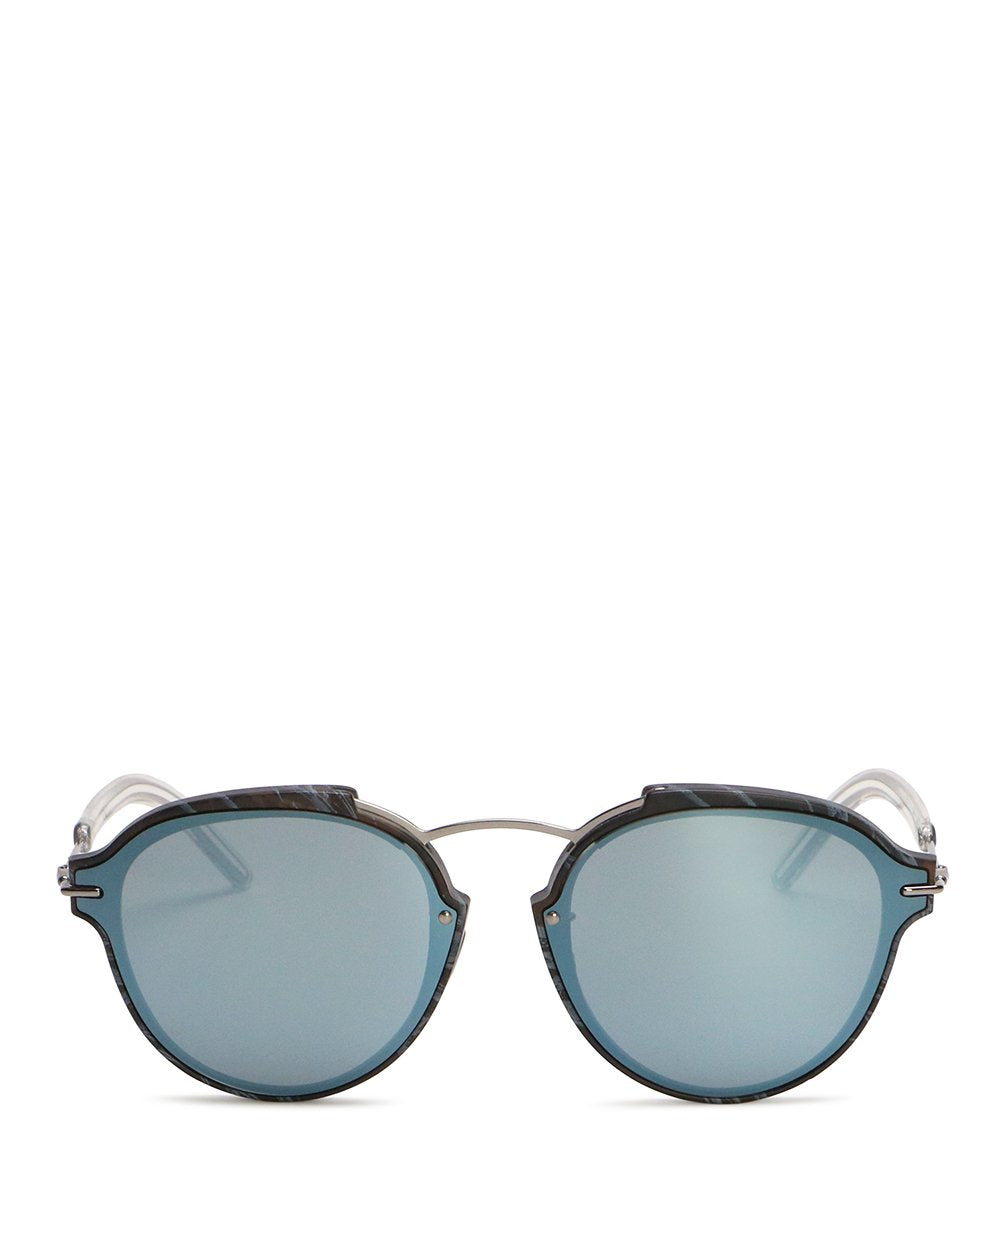 DIORECLAT Round Sunglasses - ISSI Outlet